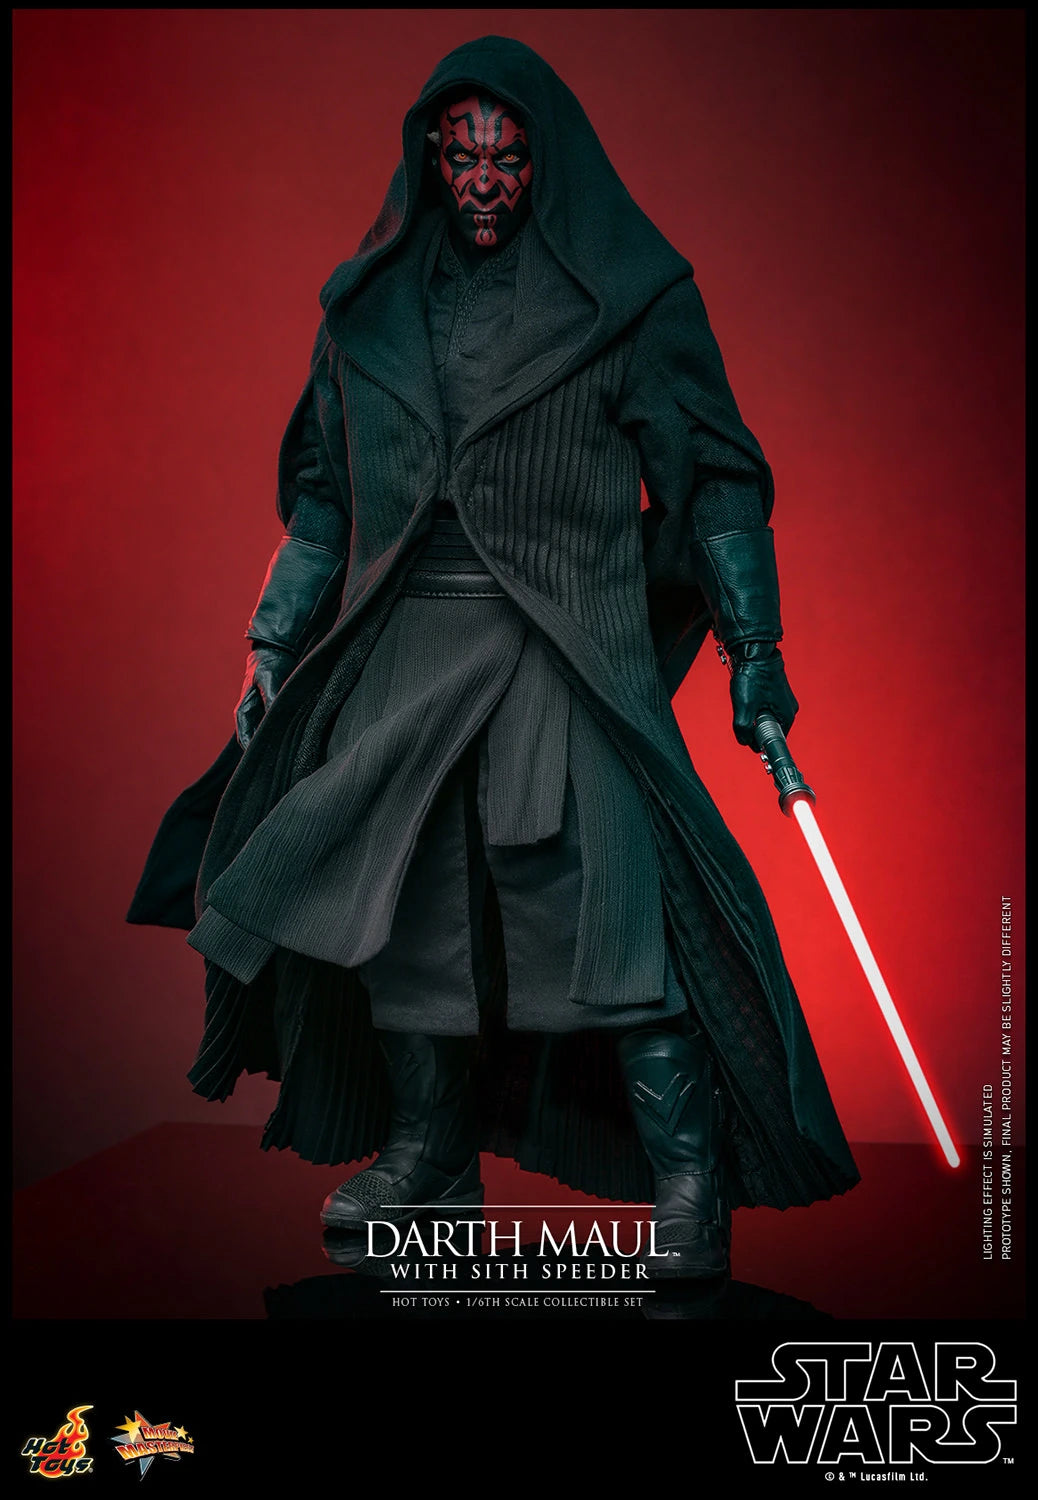 Hot Toys Star Wars The Phantom Menace Darth Maul With Sith Speeder 1/6th Scale Figure Set